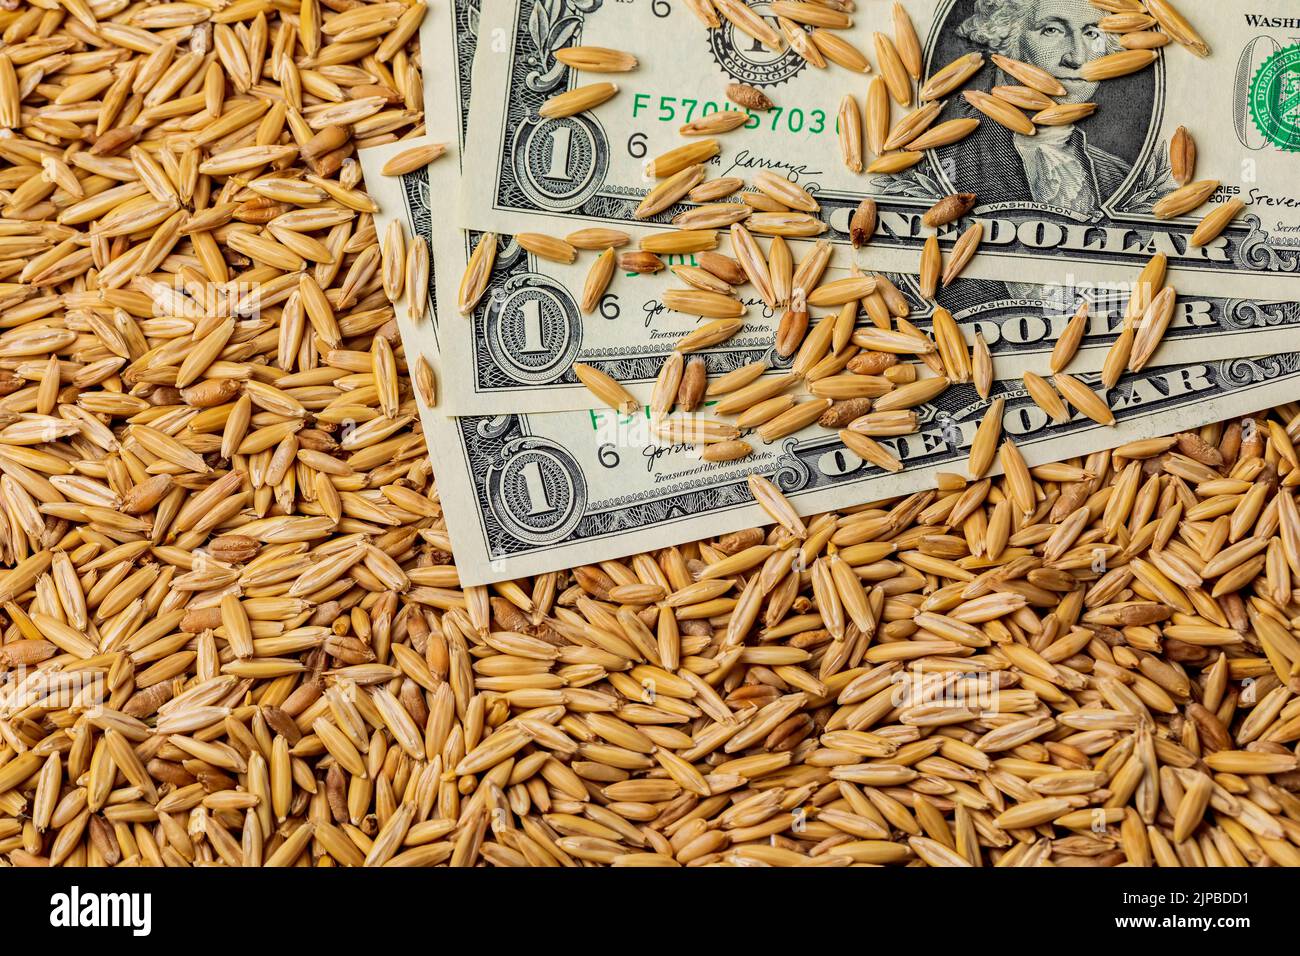 Oat seed and 1 dollar bills. Oats farming, trade and market price concept Stock Photo